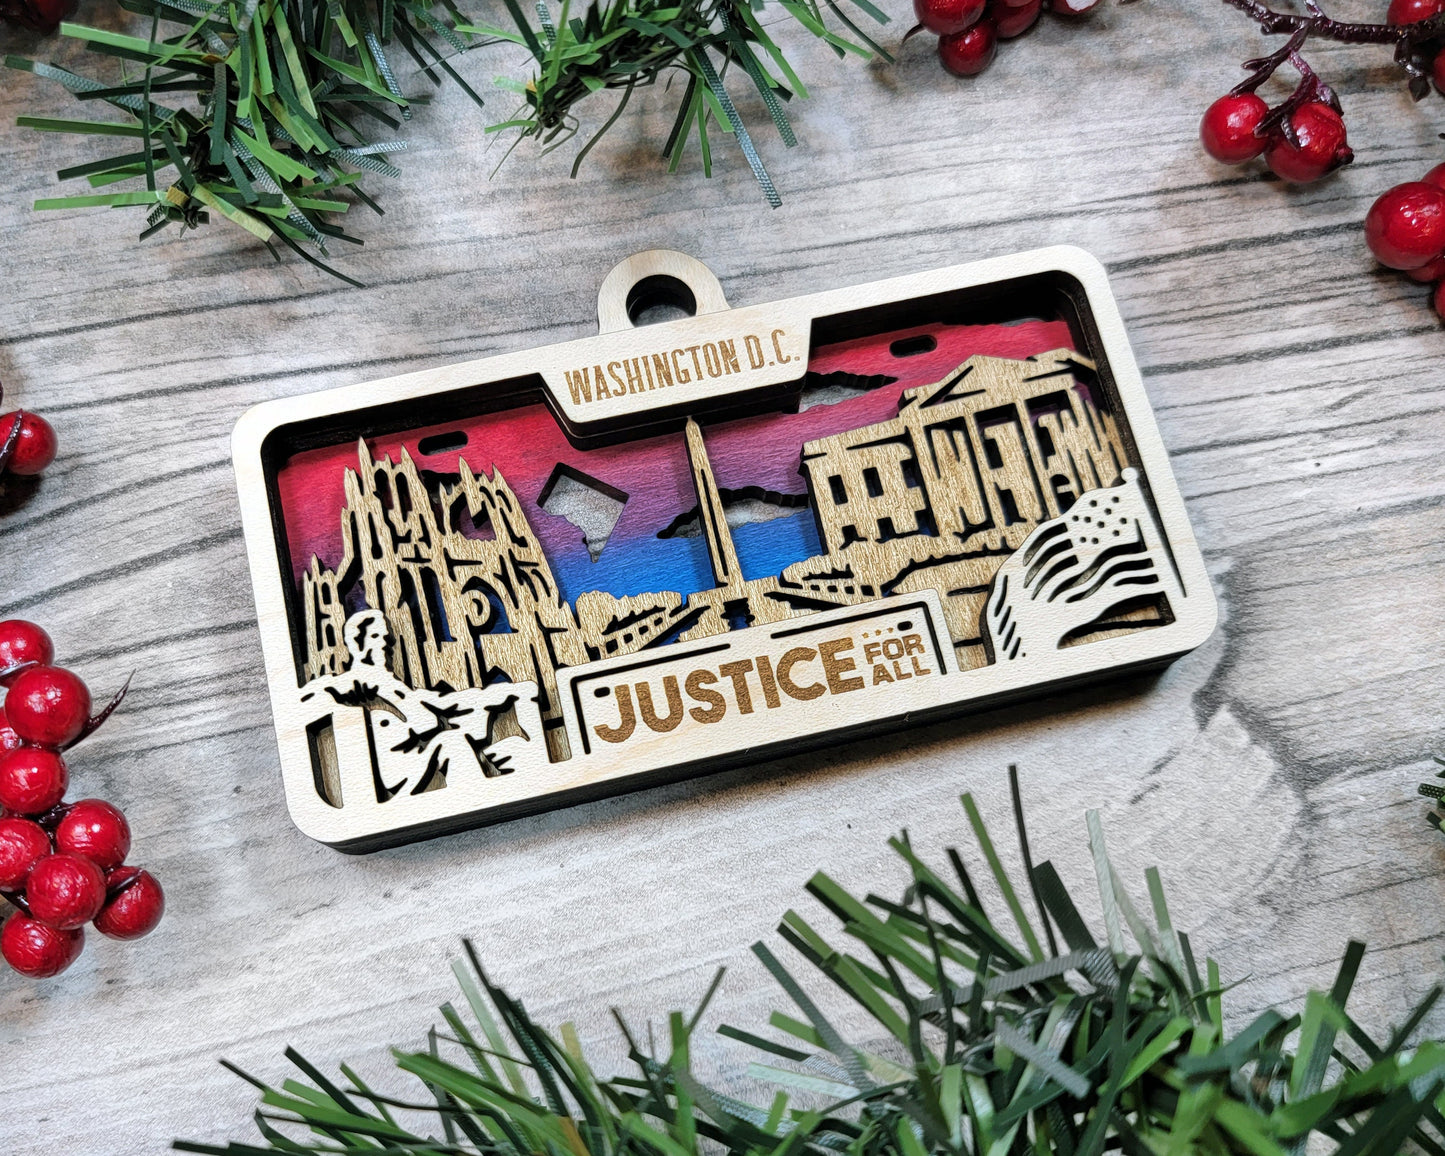 Washington DC State Plate Ornament and Signage - SVG File Download - Sized for Glowforge - Laser Ready Digital Files